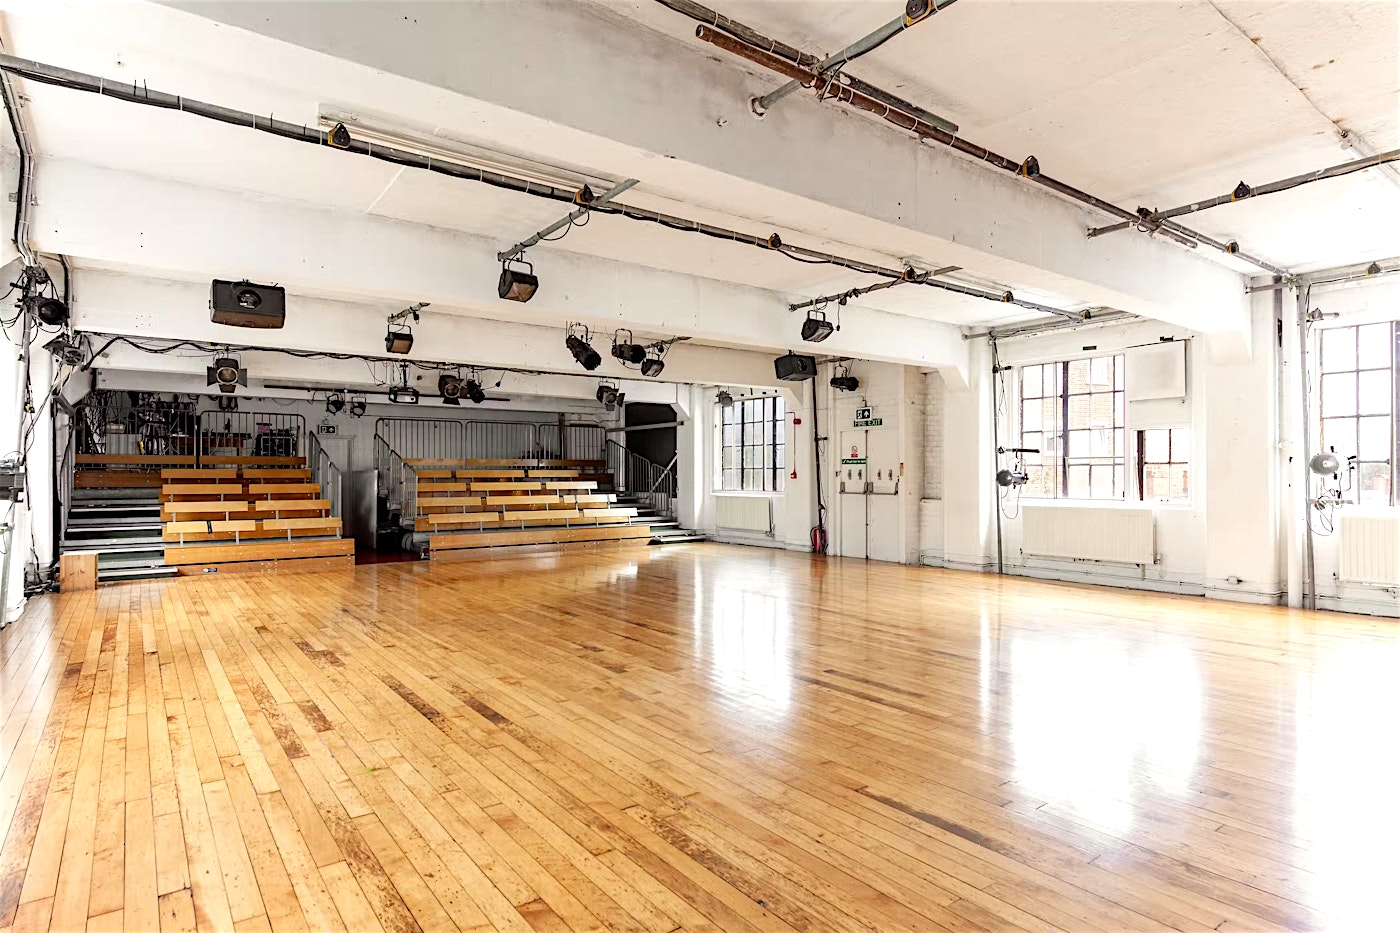 This rehearsal room is near Victoria Park, east London